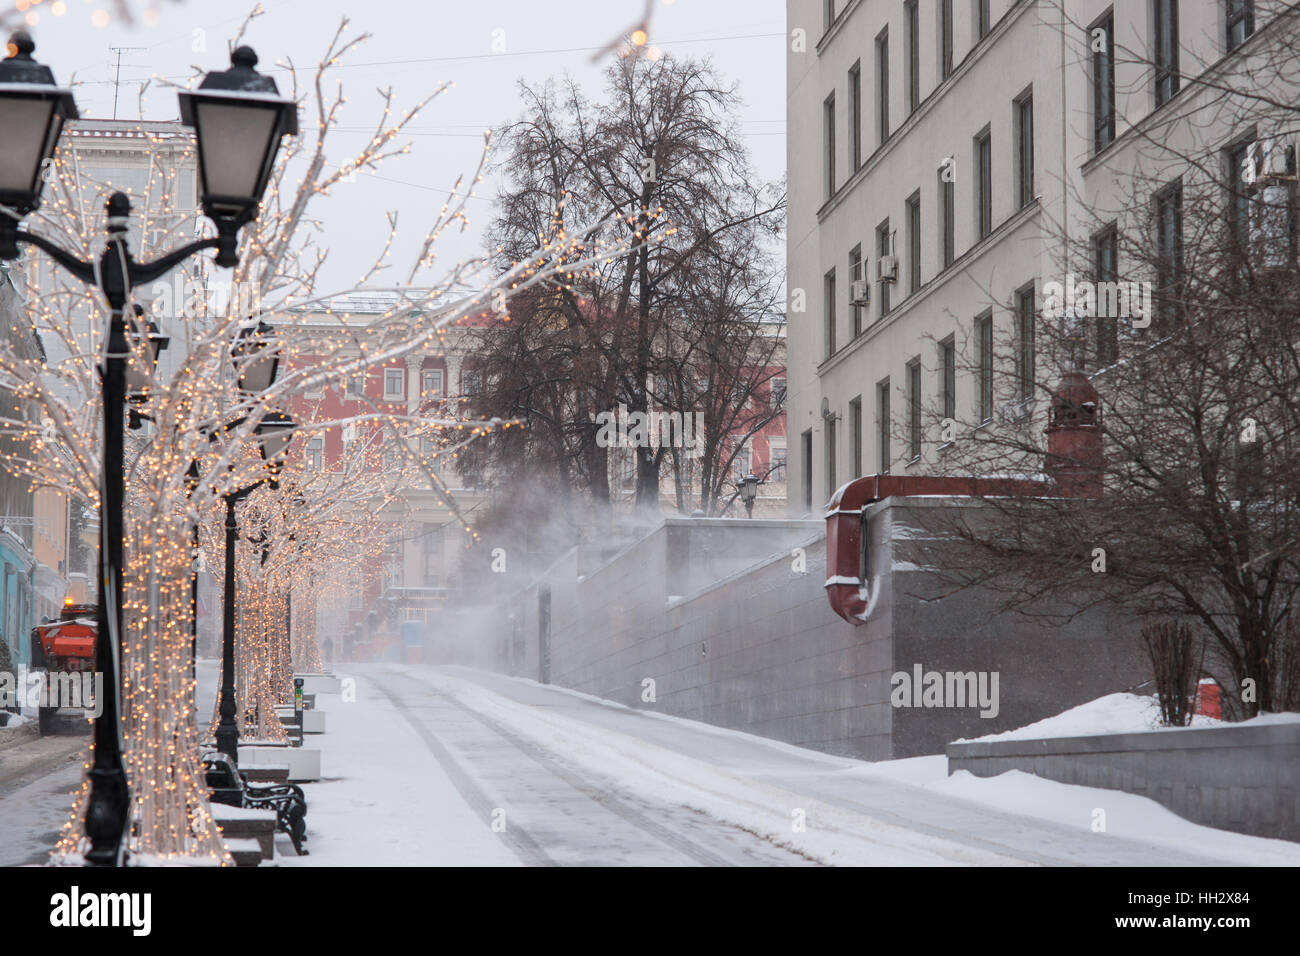 Moscow, Russia. Sunday, January 15, 2017. A blast of wind and a cloud of cold snow in the air. Former Marx, Engels, Lenin research institute (right). Wet, windy and snowy Sunday in Moscow. The temperature is about -2C (28F). Heavy clouds, snow showers. Street cleaners and snow cleaning vehicles are busy. © Alex's Pictures/Alamy Live News Stock Photo